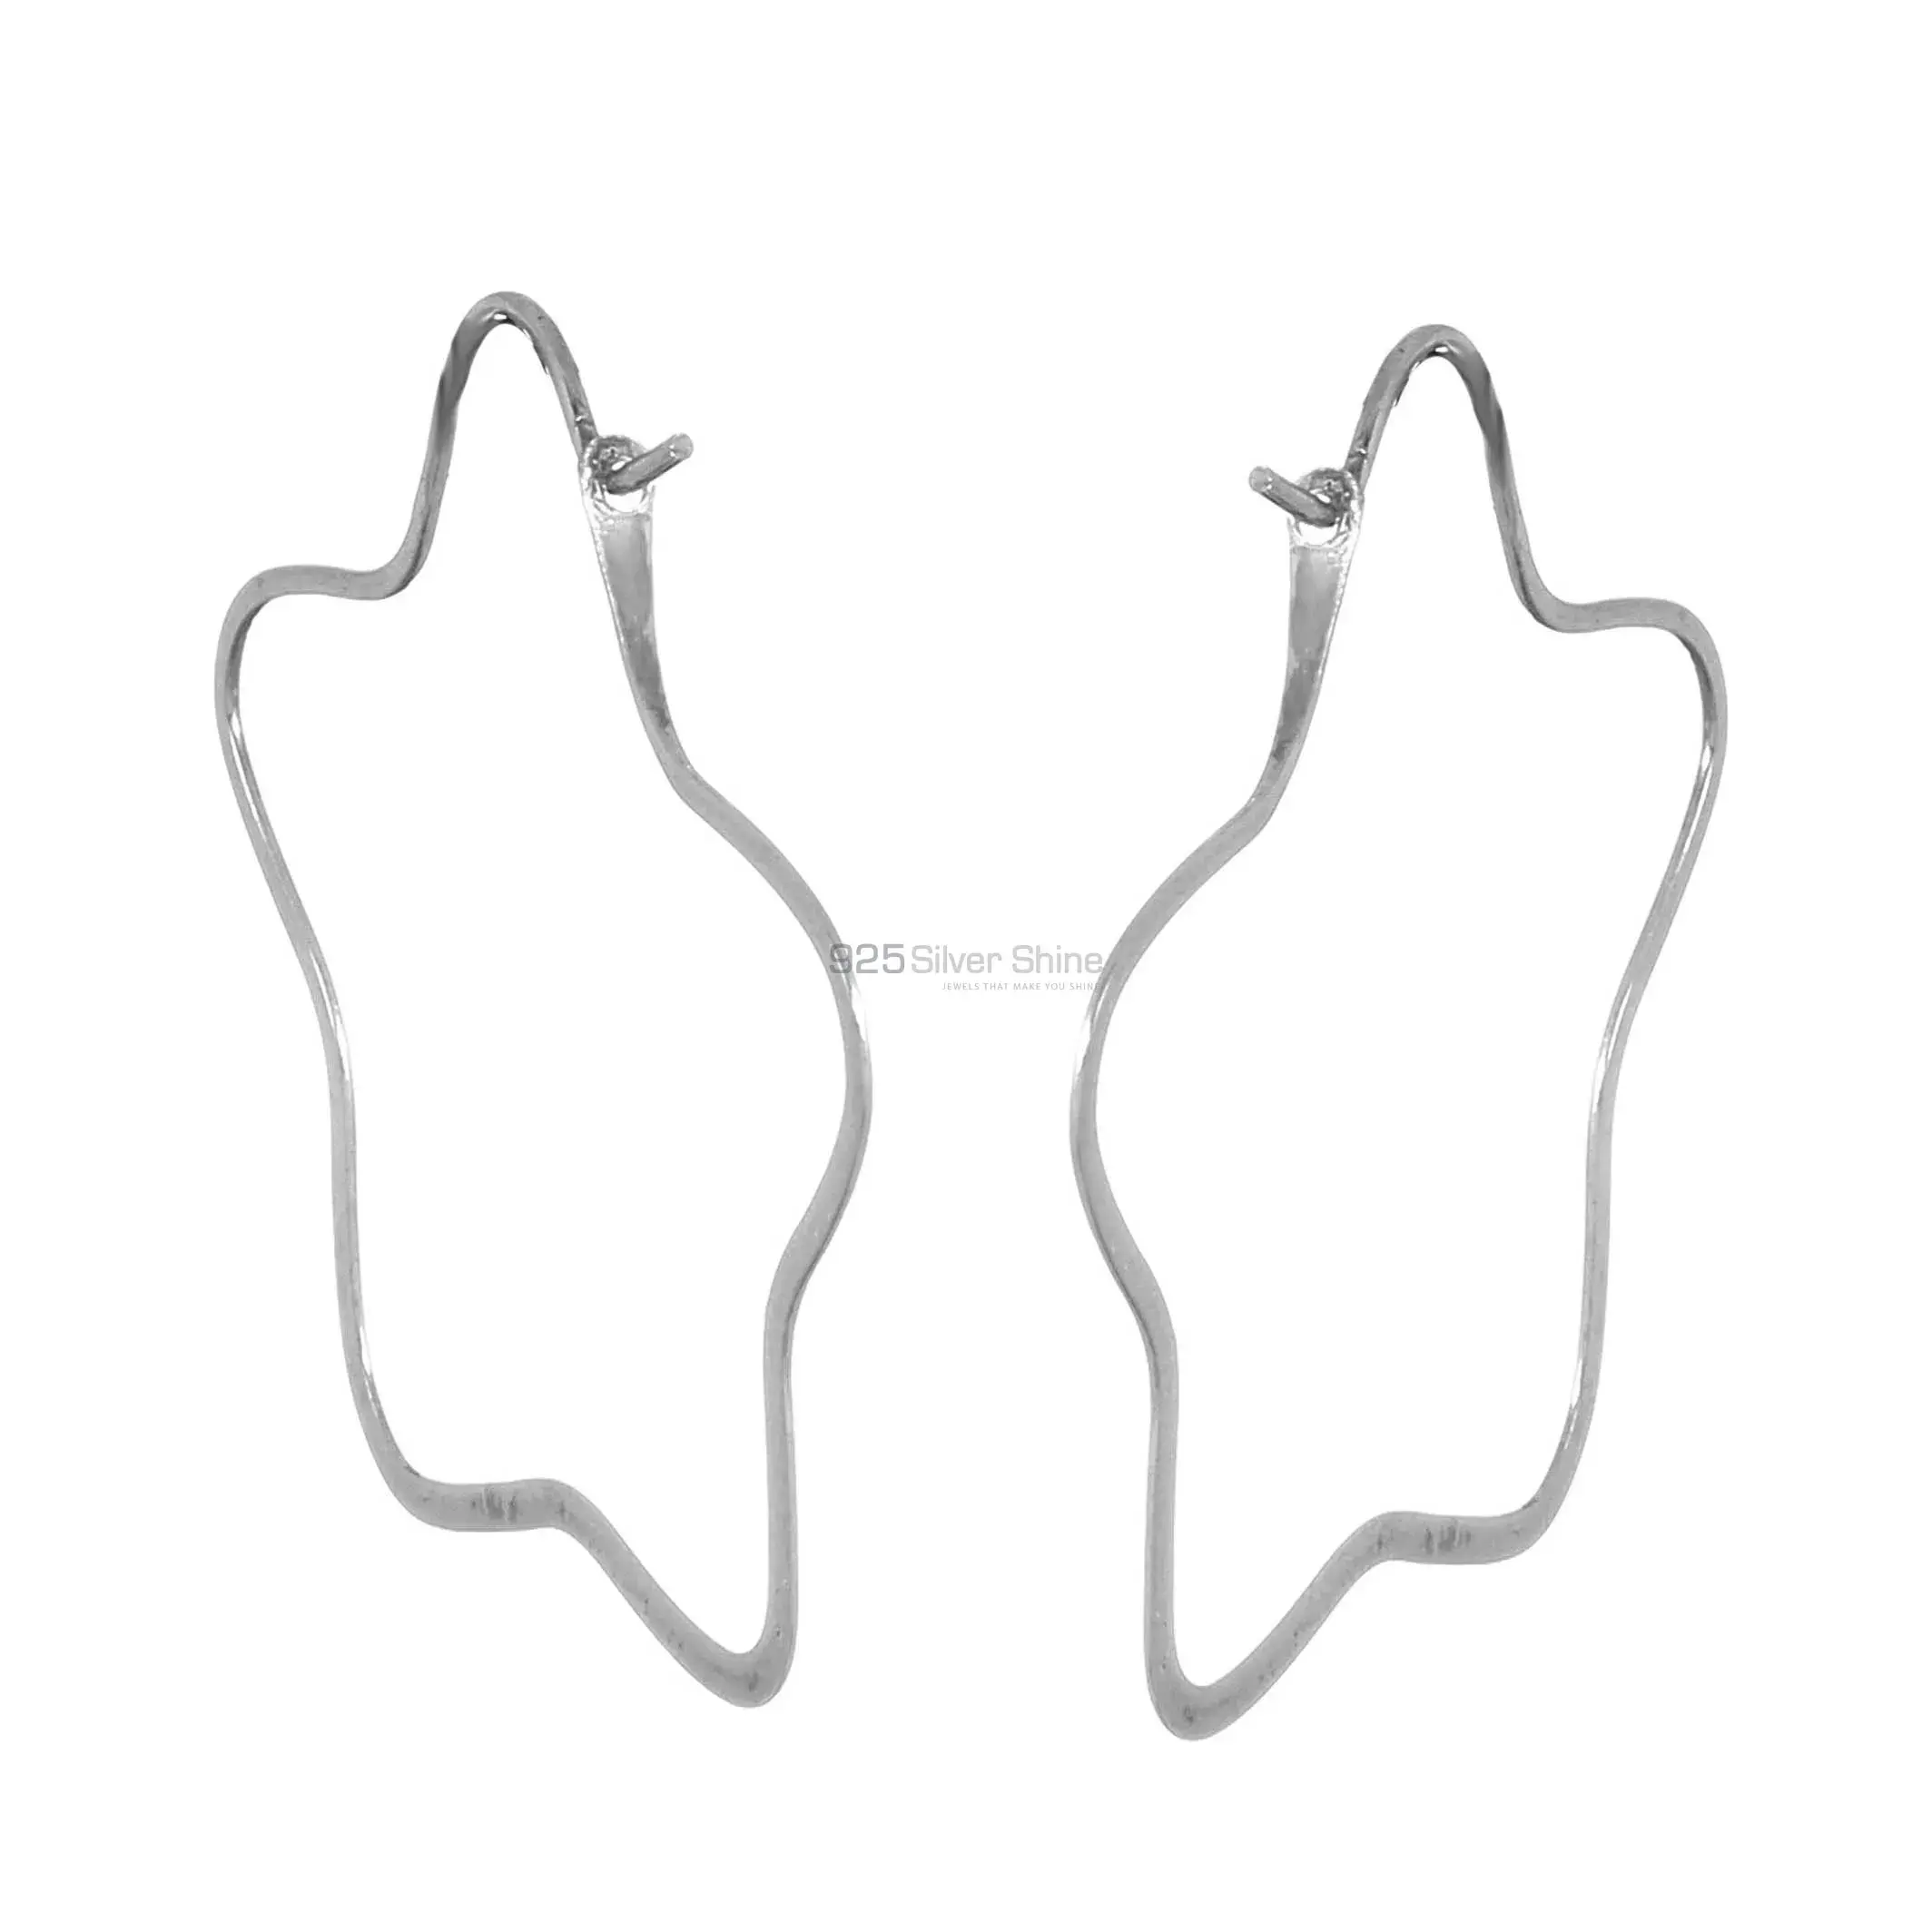 Top Quality Solid 925 Silver Handmade earring 925SE304_0